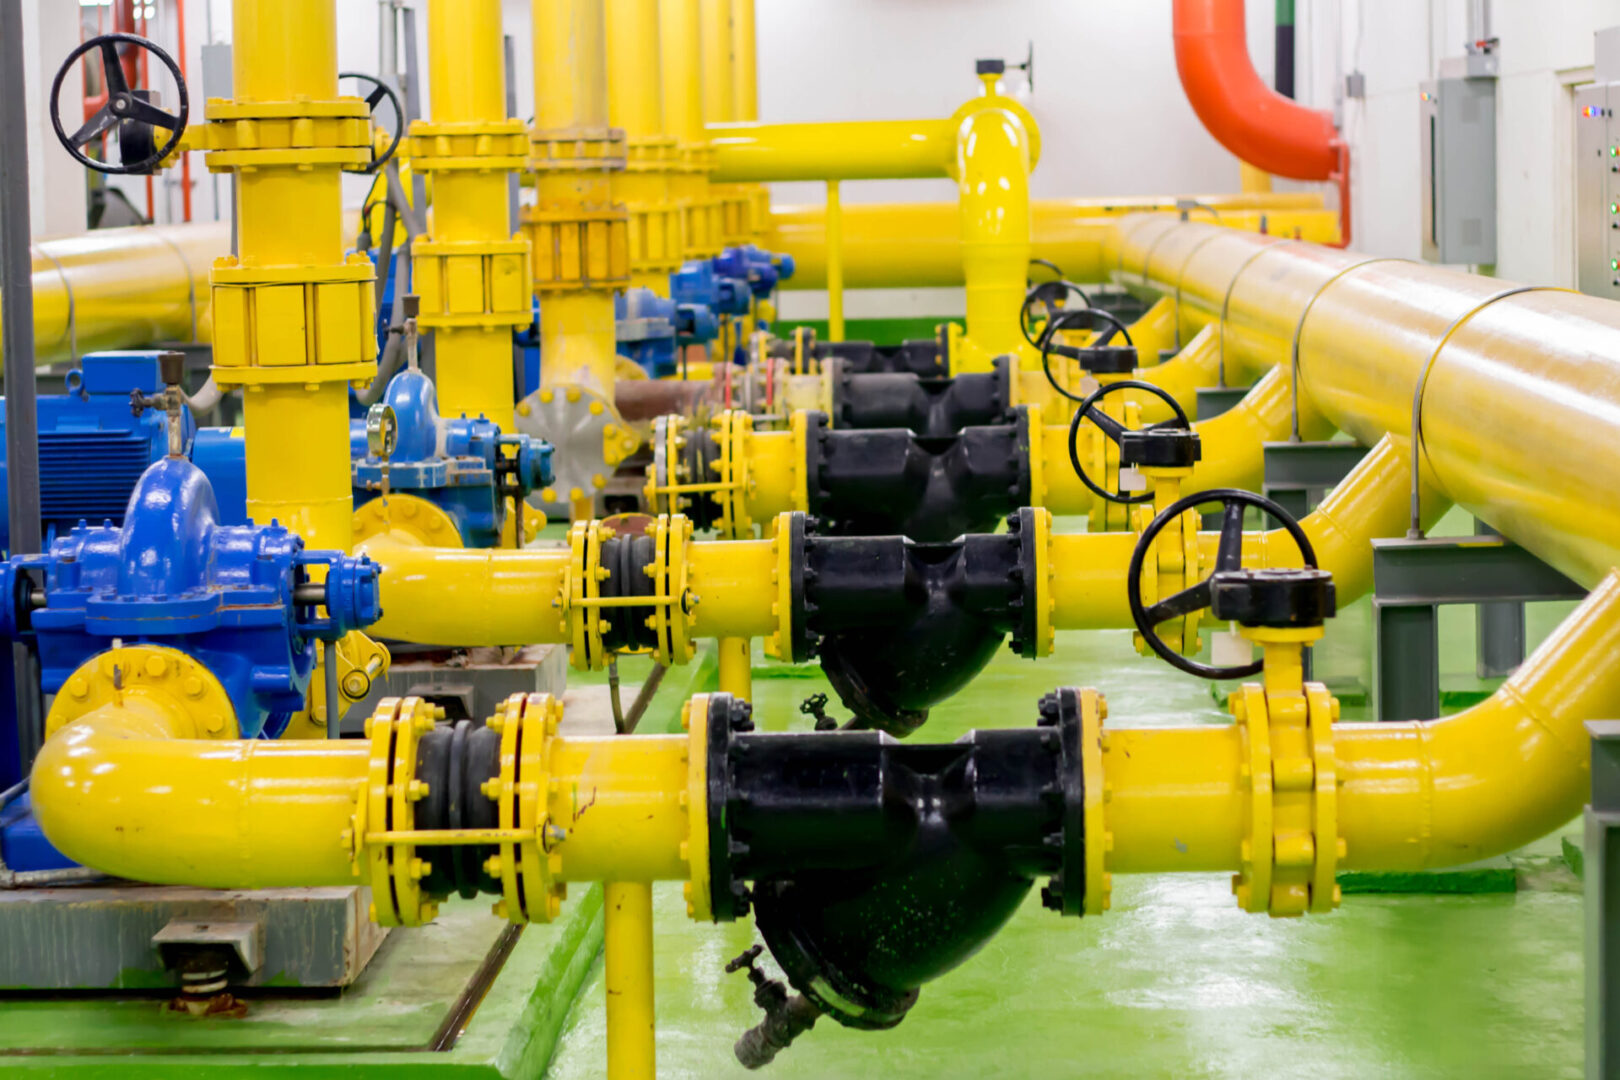 A yellow and blue gas pipeline with valves.